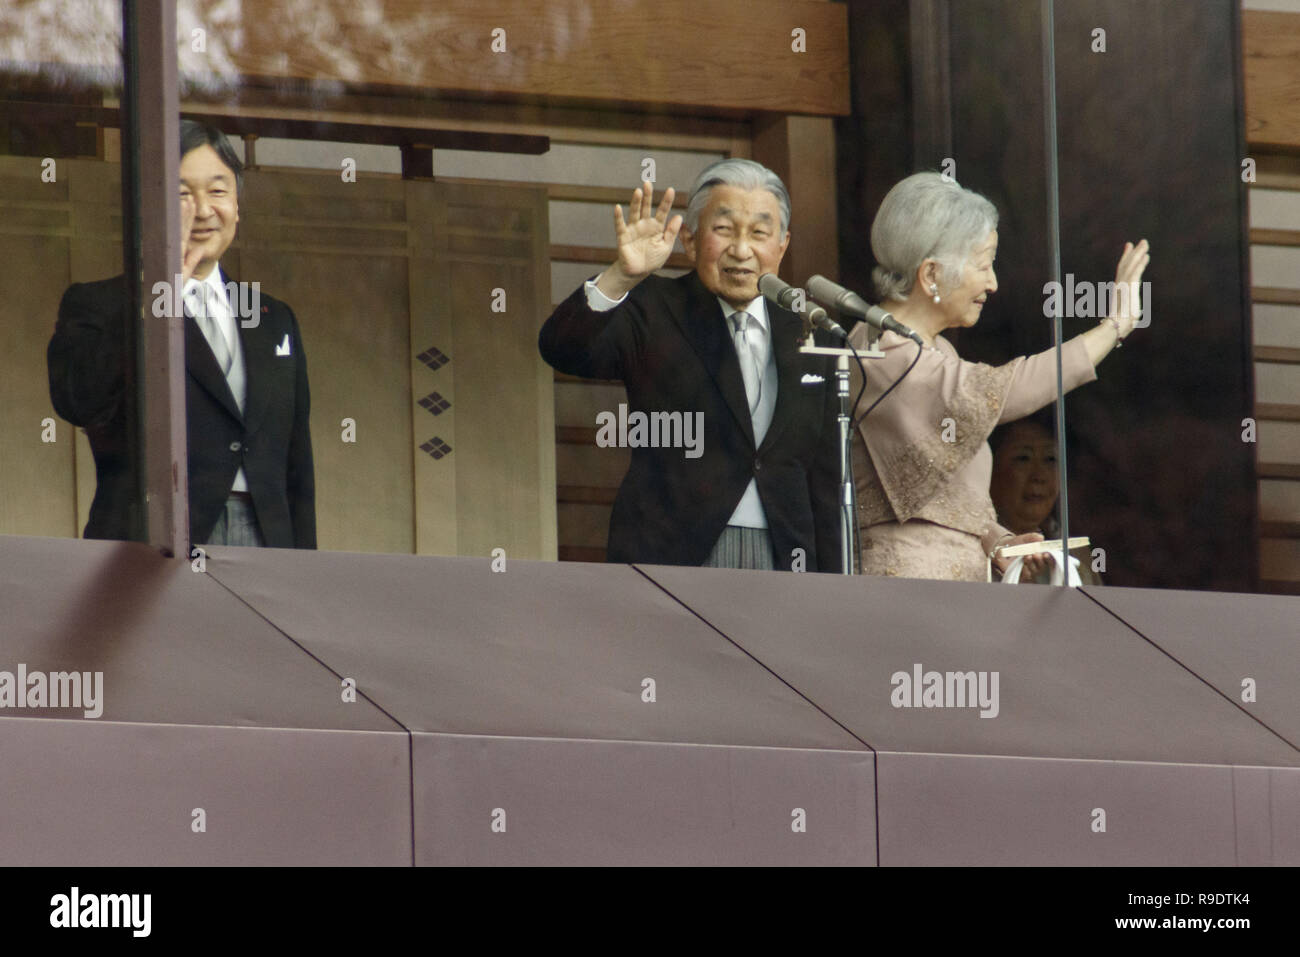 Tokyo, Japan. 23rd Dec, 2018. Emperor Akihito of Japan (C) accompanied by his wife Empress Michiko and his son Crown Prince Naruhito (L), wave to well-wishers during his 85th birthday celebration at the Imperial Palace. People gather to celebrate Akihito's birthday at the Imperial Palace, his last in his 30-year reign. Akihito is set to abdicate next April 30, to be succeeded by his eldest son, Crown Prince Naruhito, on May 1. Credit: Rodrigo Reyes Marin/ZUMA Wire/Alamy Live News Stock Photo